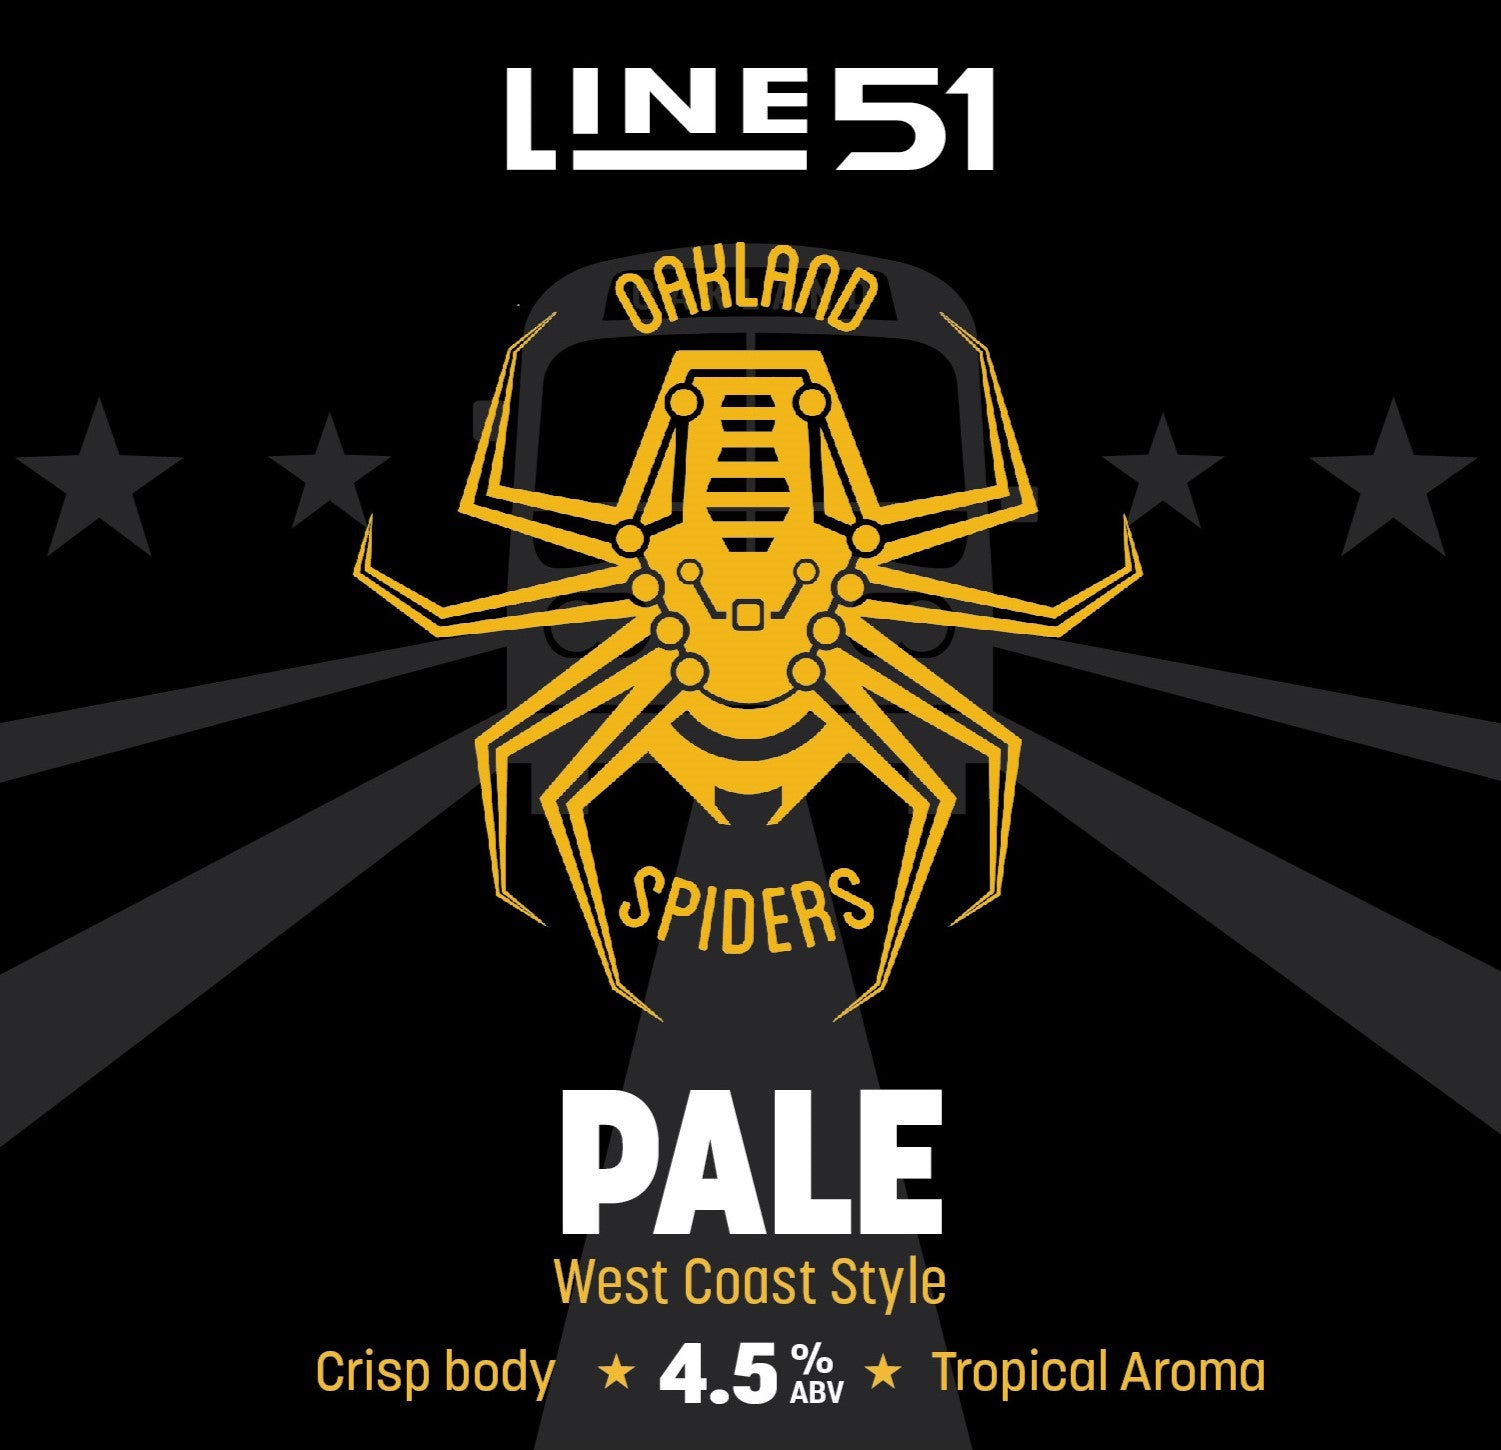 Spiders Pale Ale